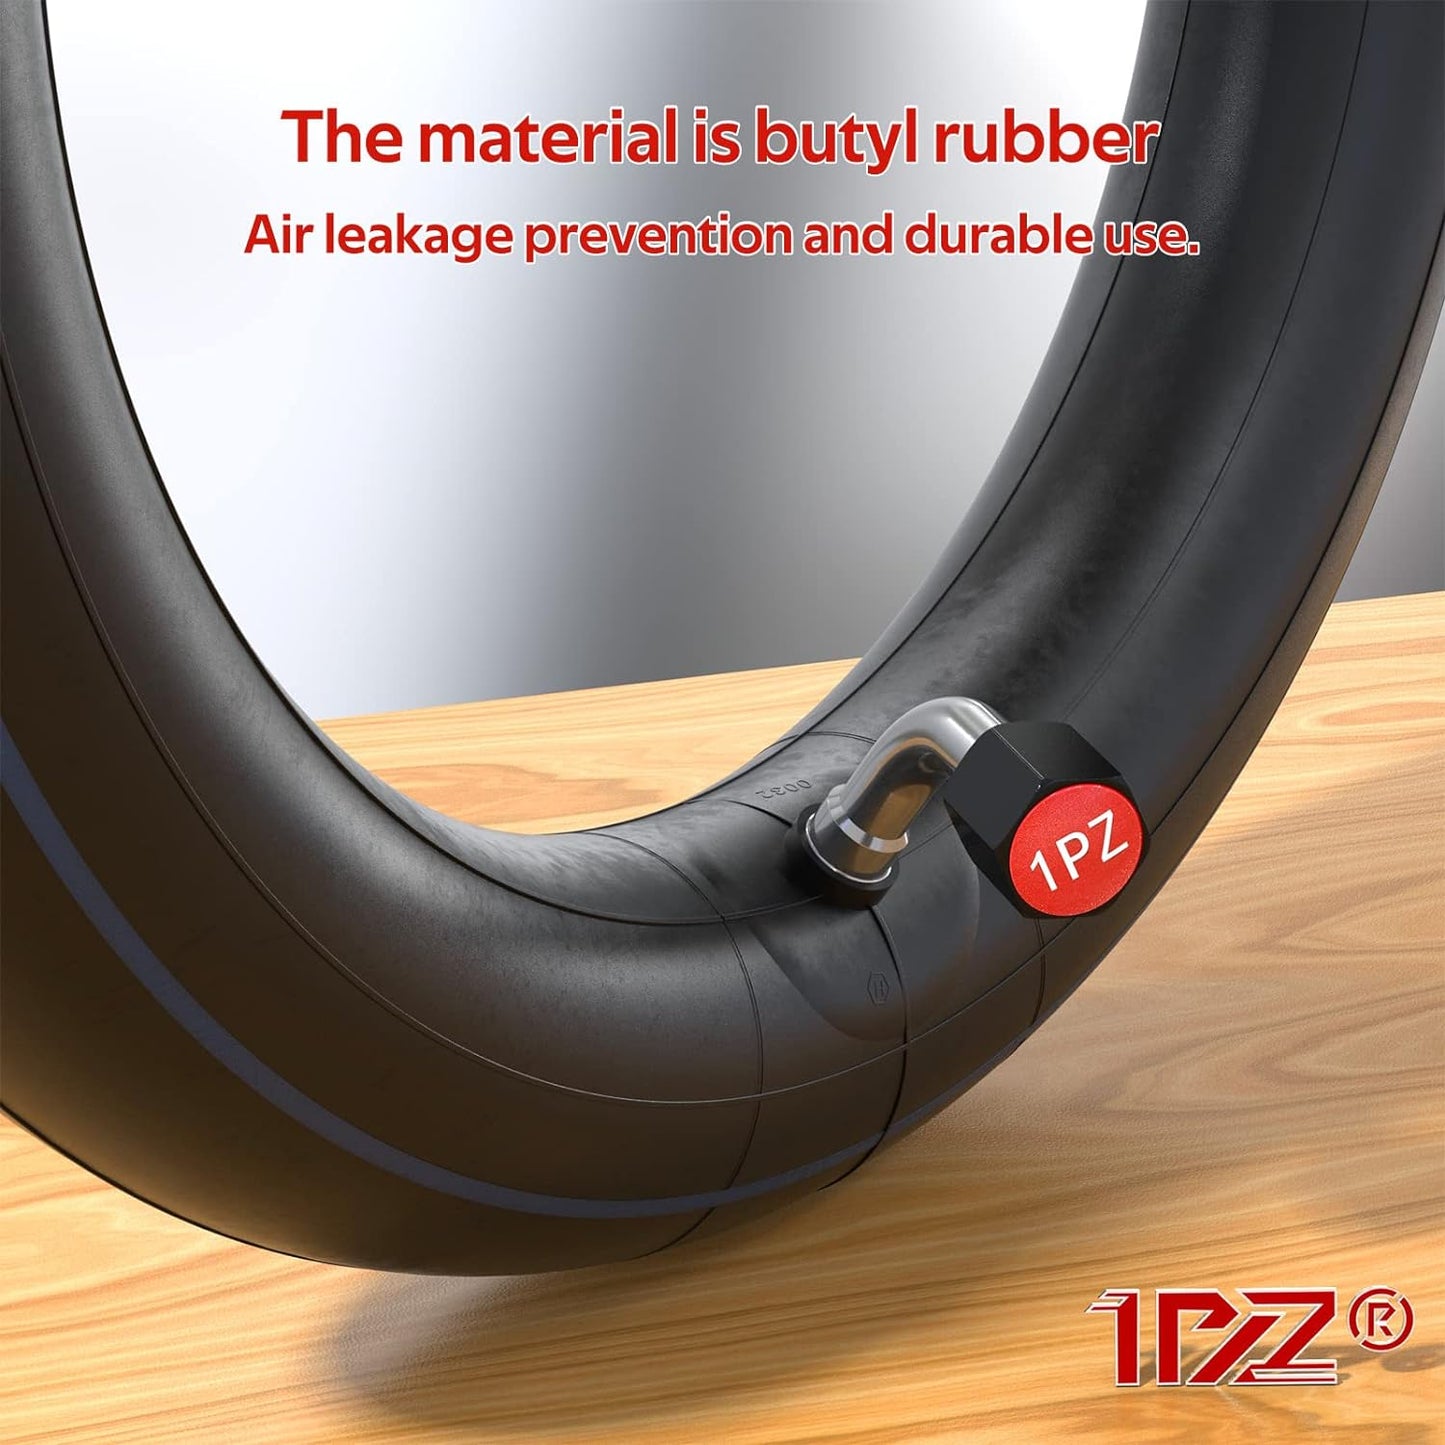 1PZ ET1-R04 10x2.125 Tire & Inner Tube 10 inch Heavy Duty Tire and Inner Tube Replacement for Smart Electric Balance Scooter Bike Tricycle Stroller Bicycle